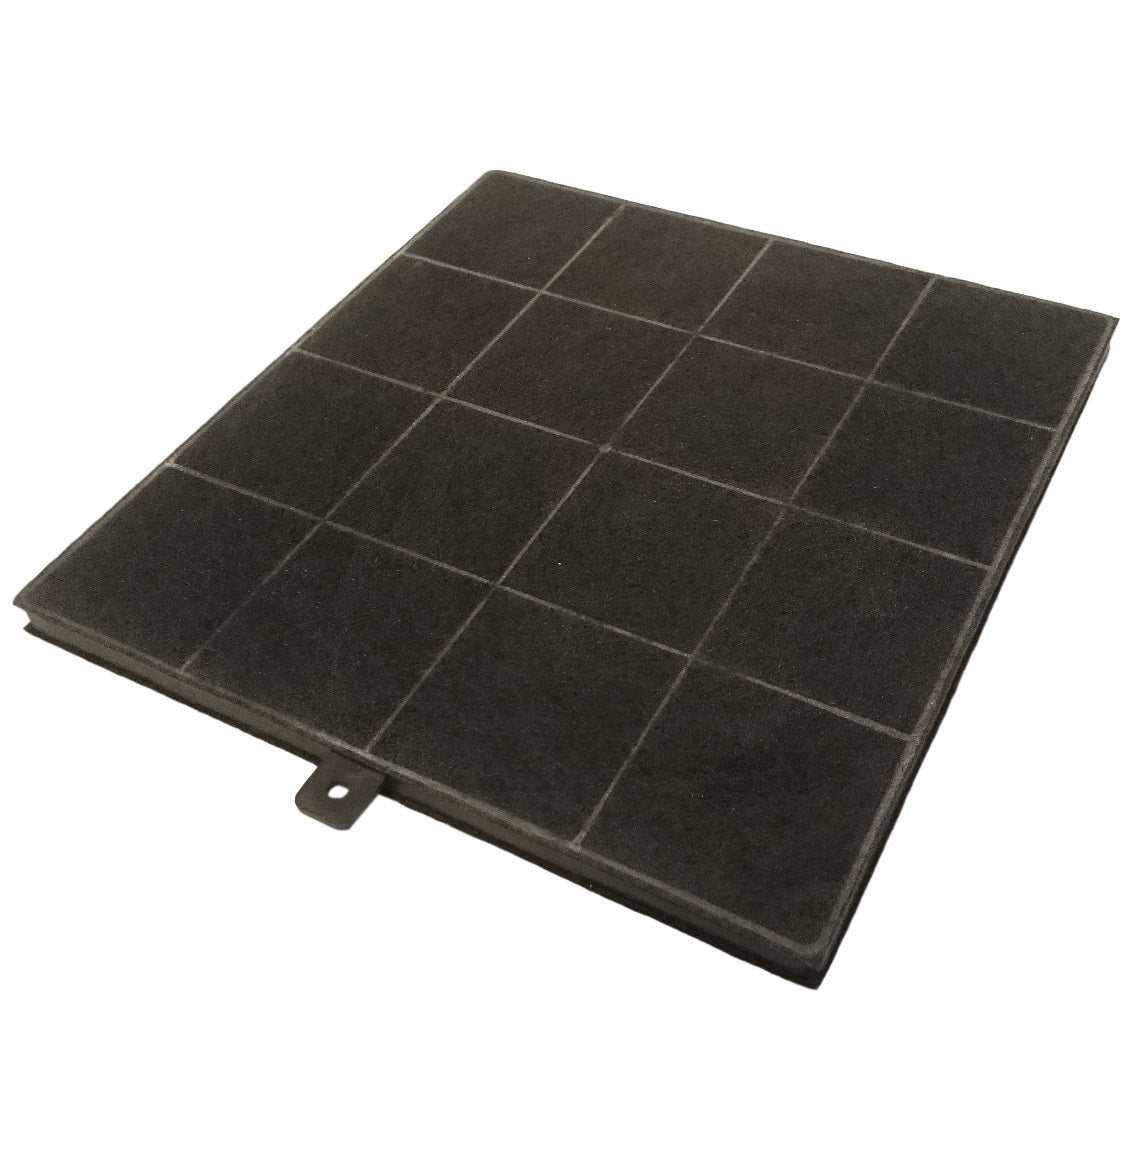 Luxair Square 2 Cooker Hood Carbon Filter